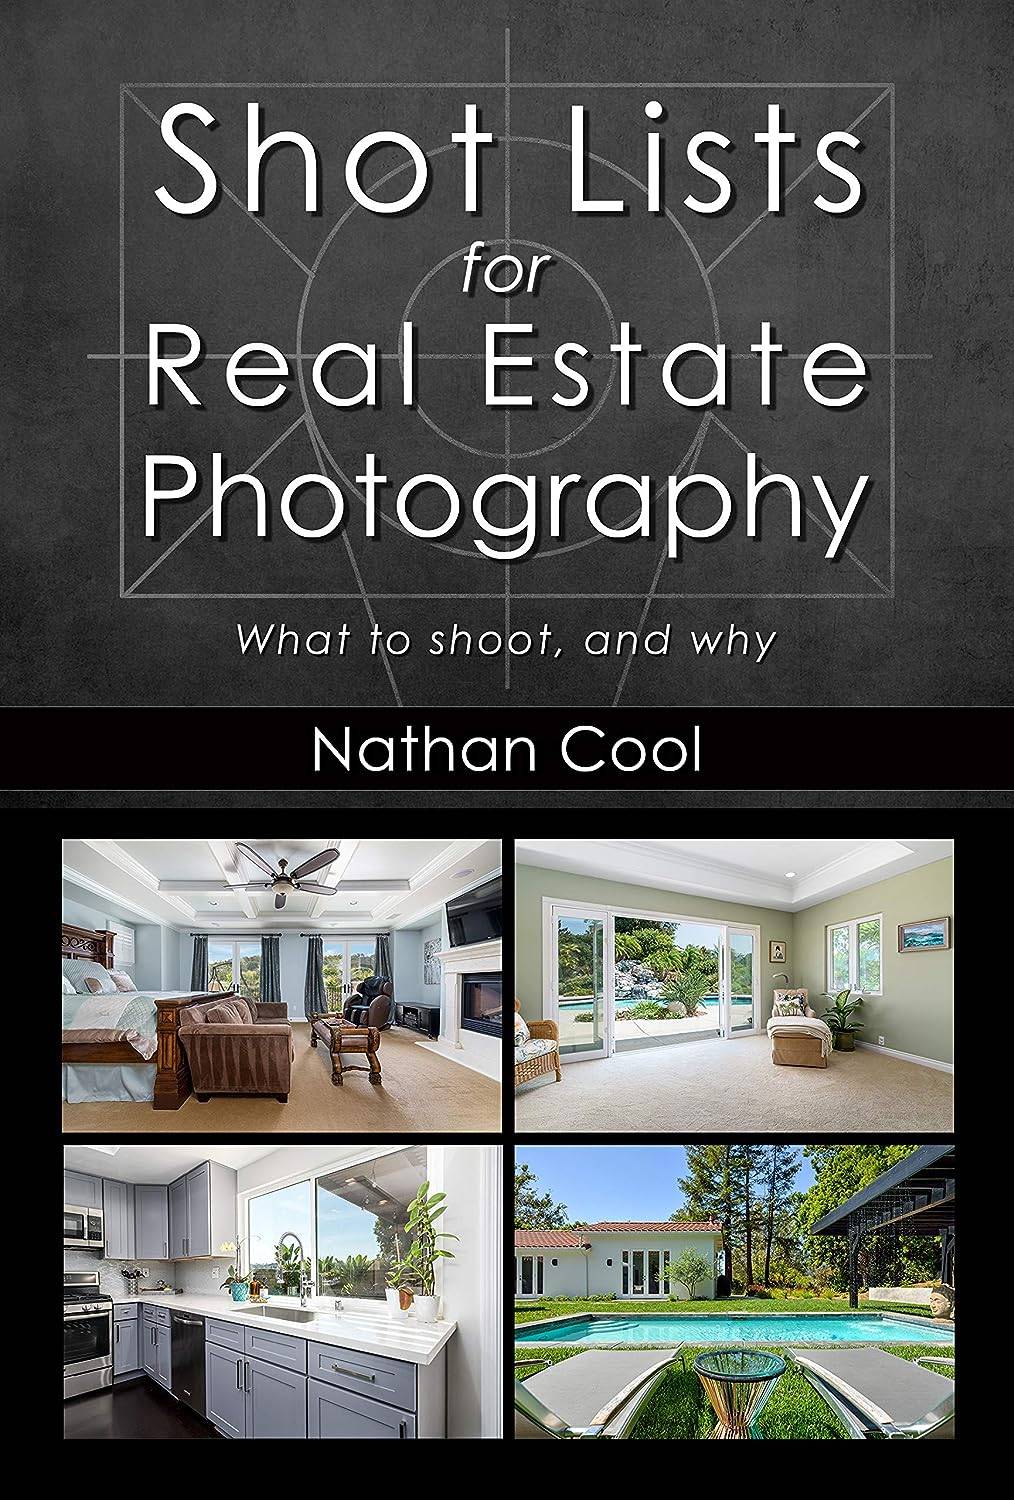 Shot Lists for Real Estate Photography